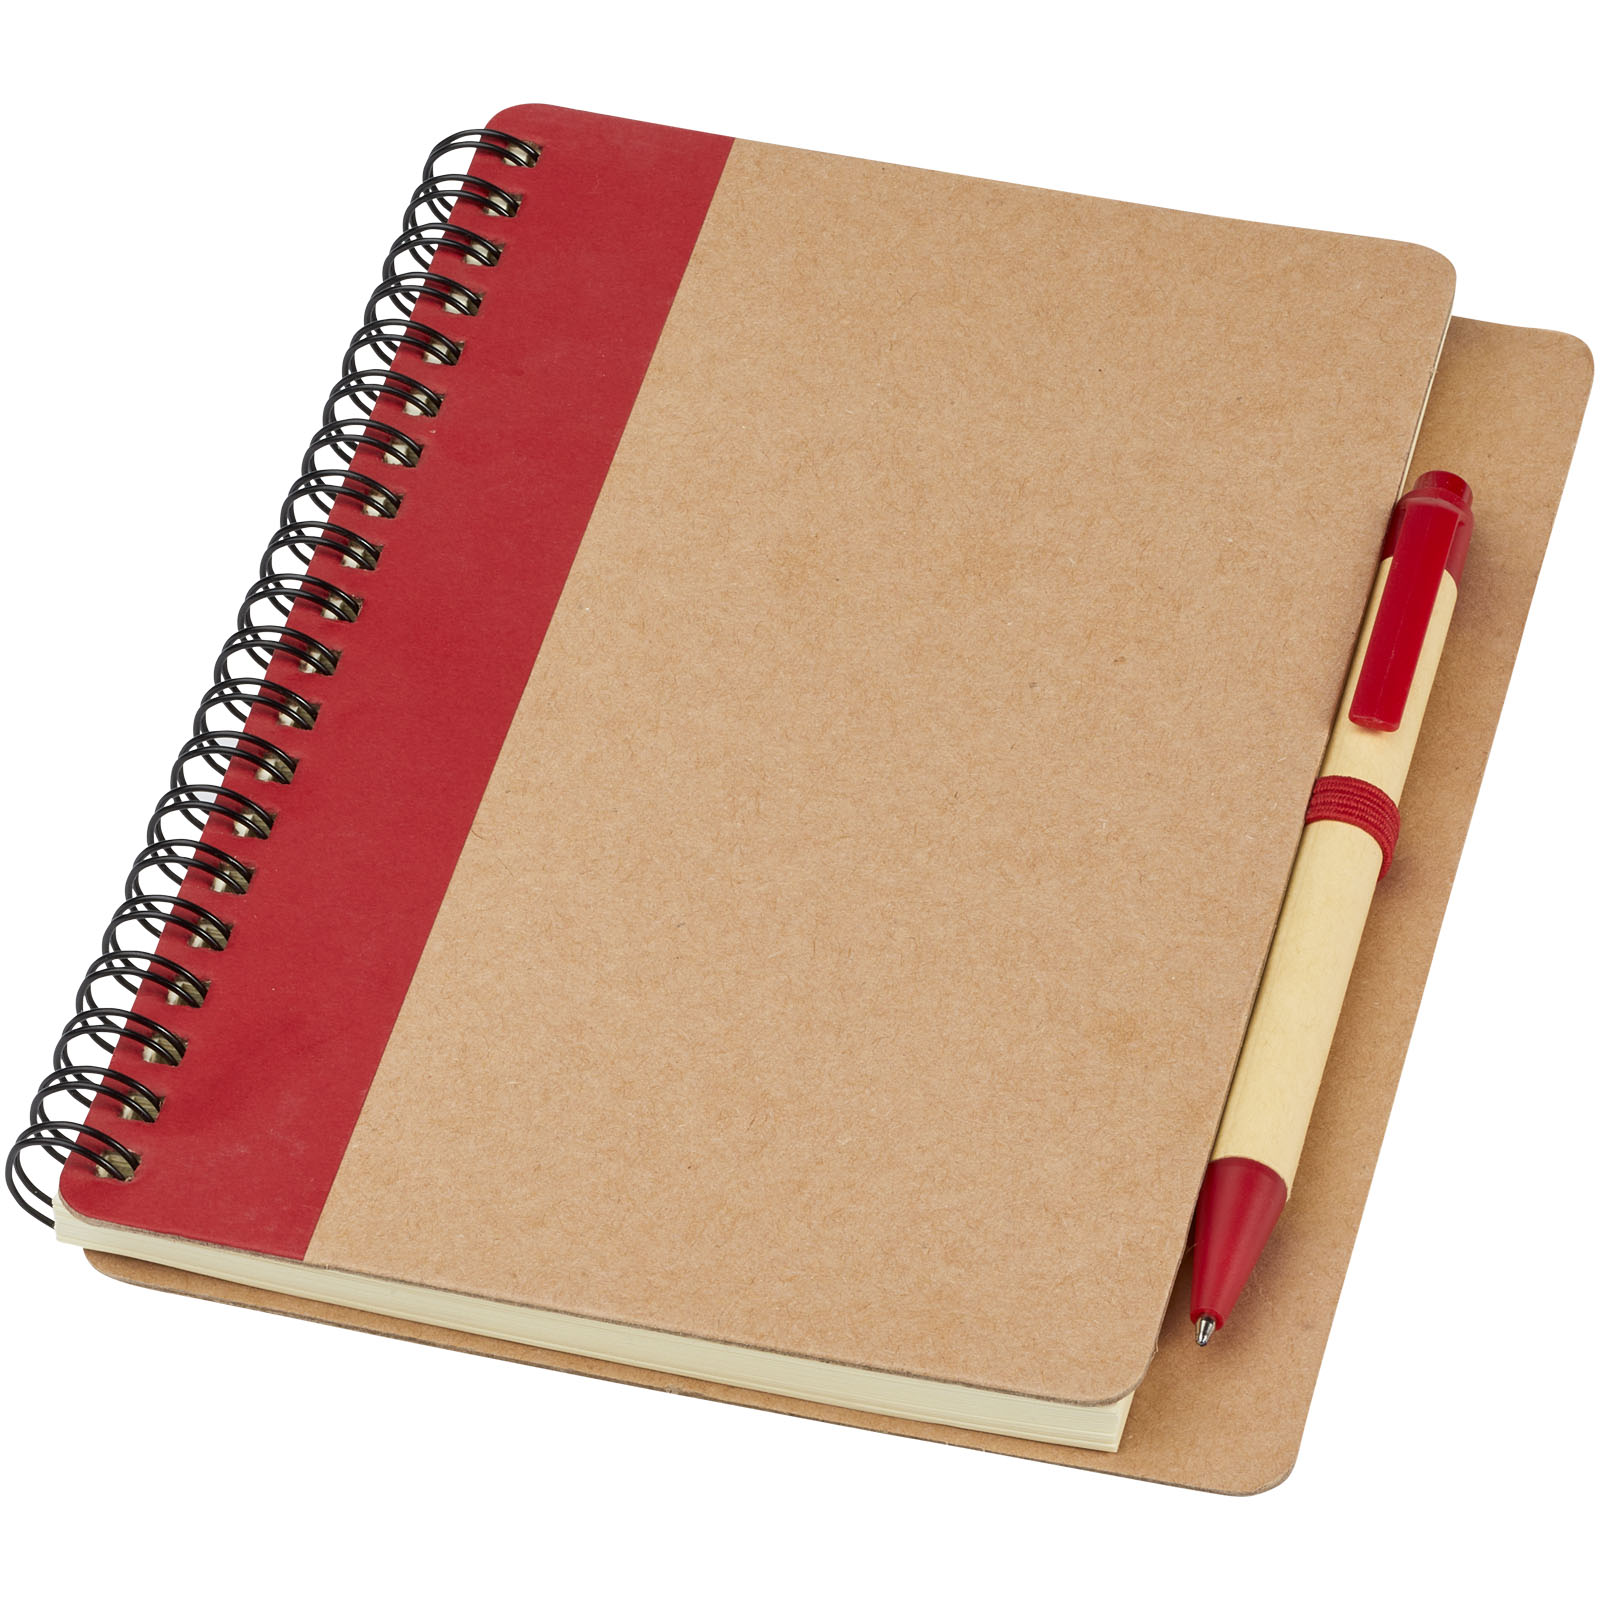 Advertising Hard cover notebooks - Priestly recycled notebook with pen